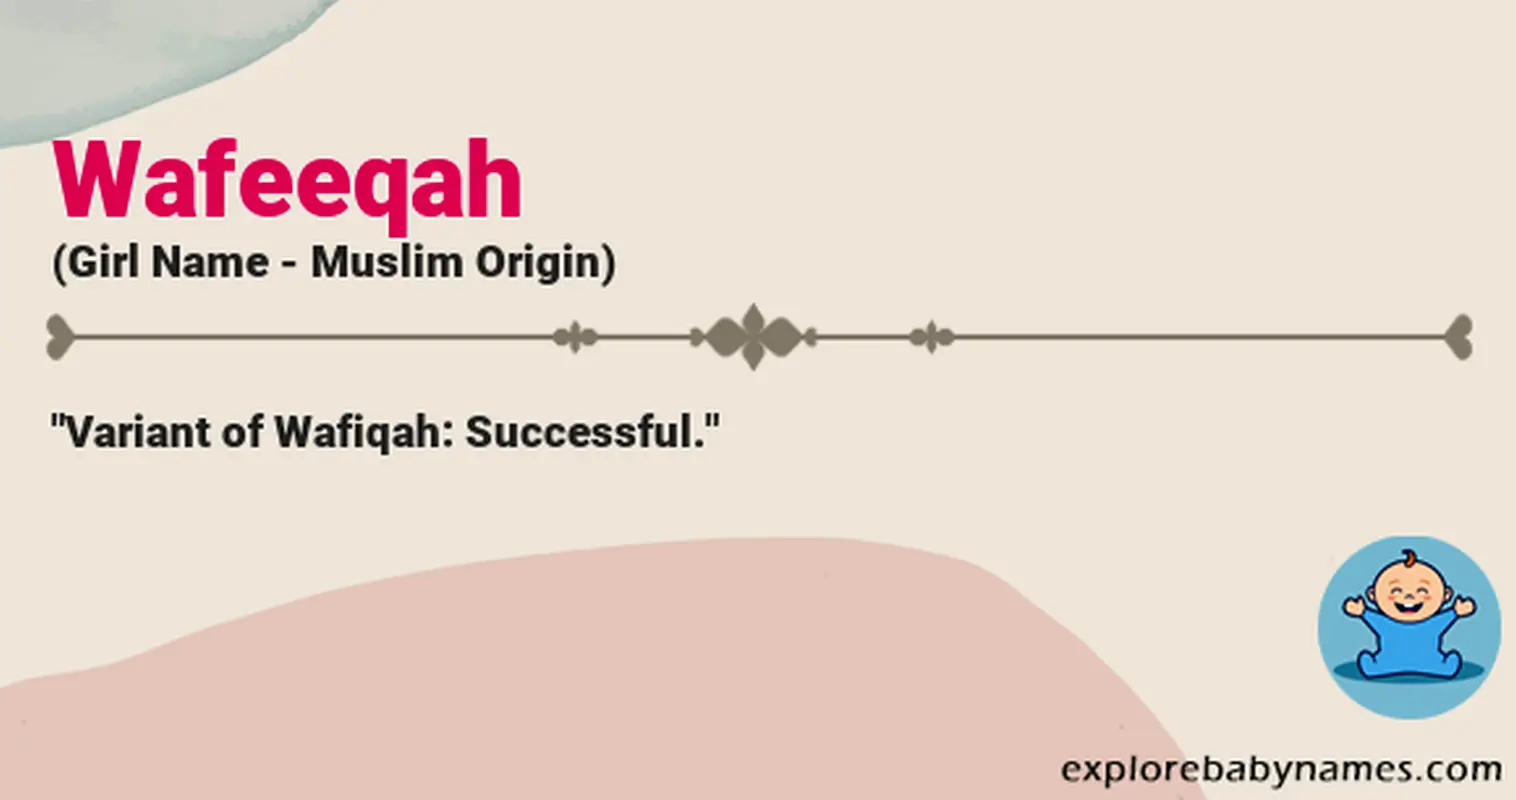 Meaning of Wafeeqah